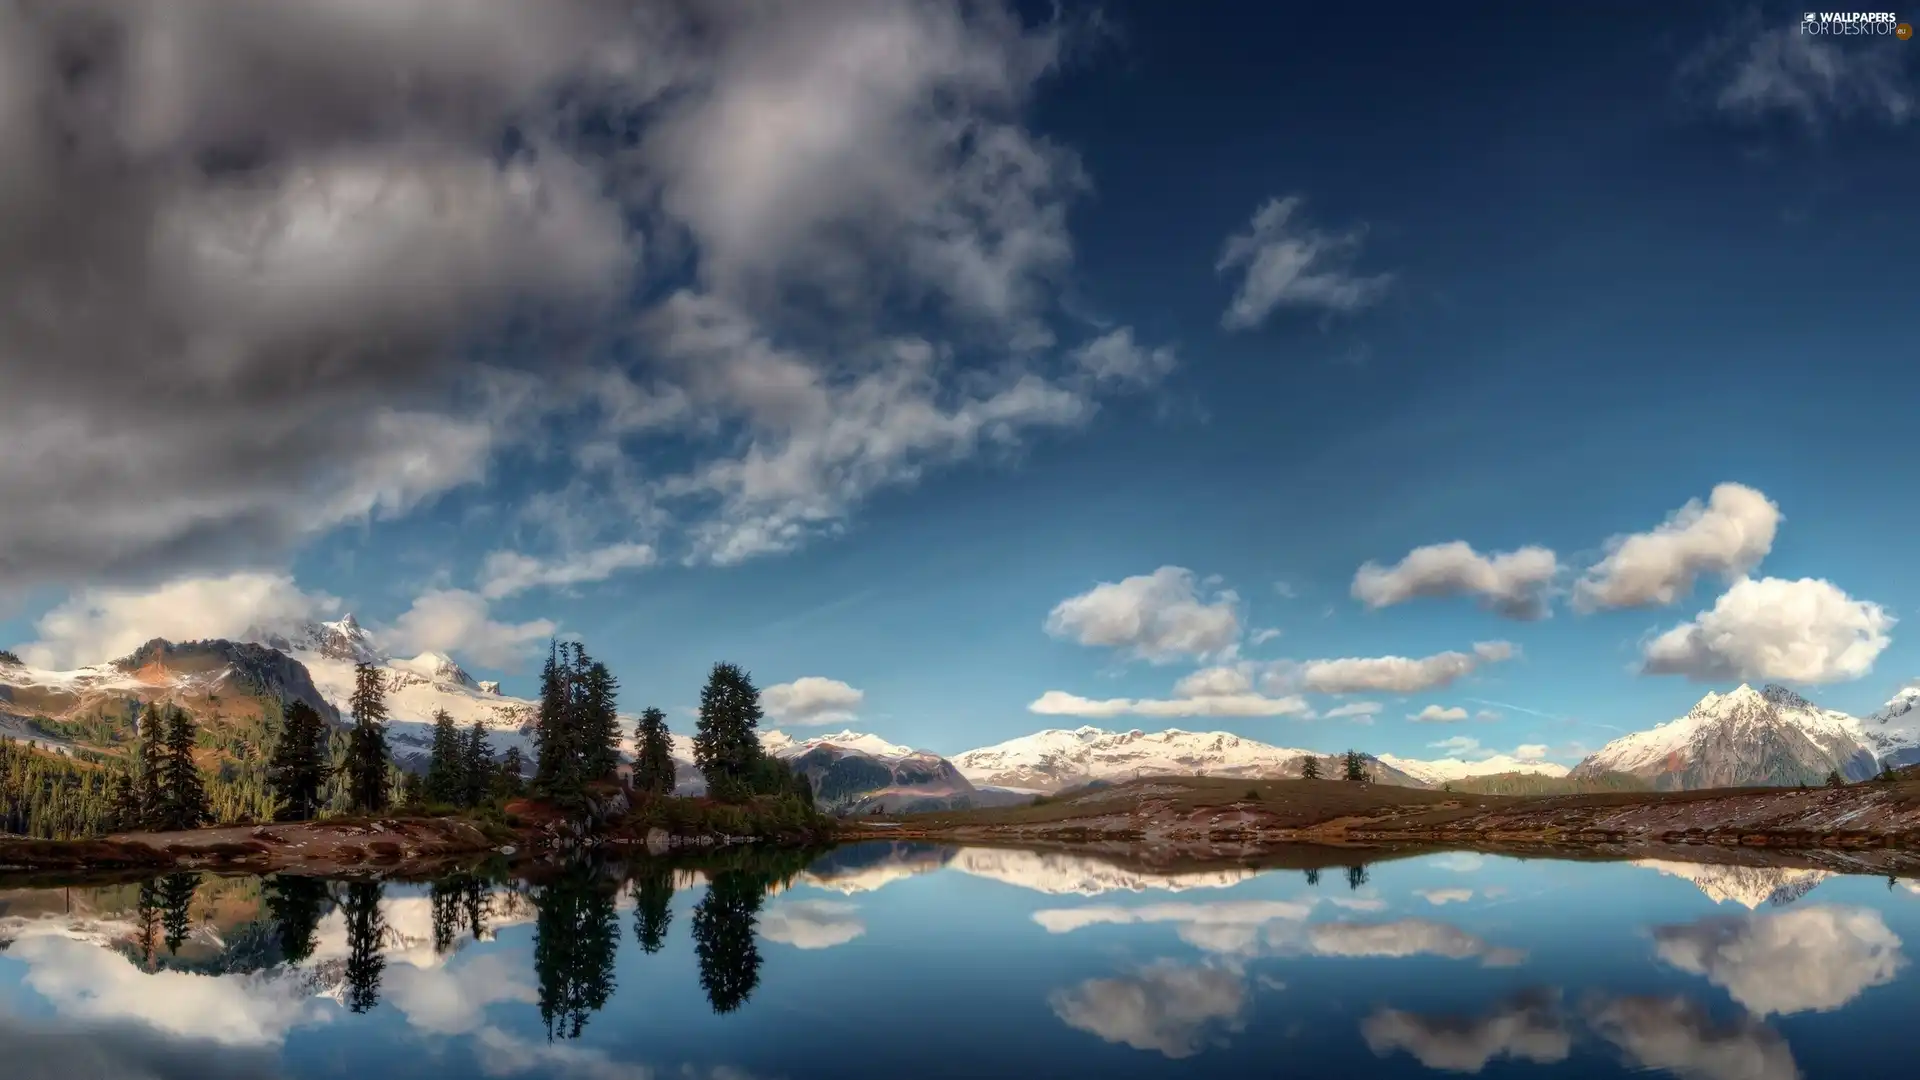 viewes, Mountains, clouds, trees, lake, Sky, reflection